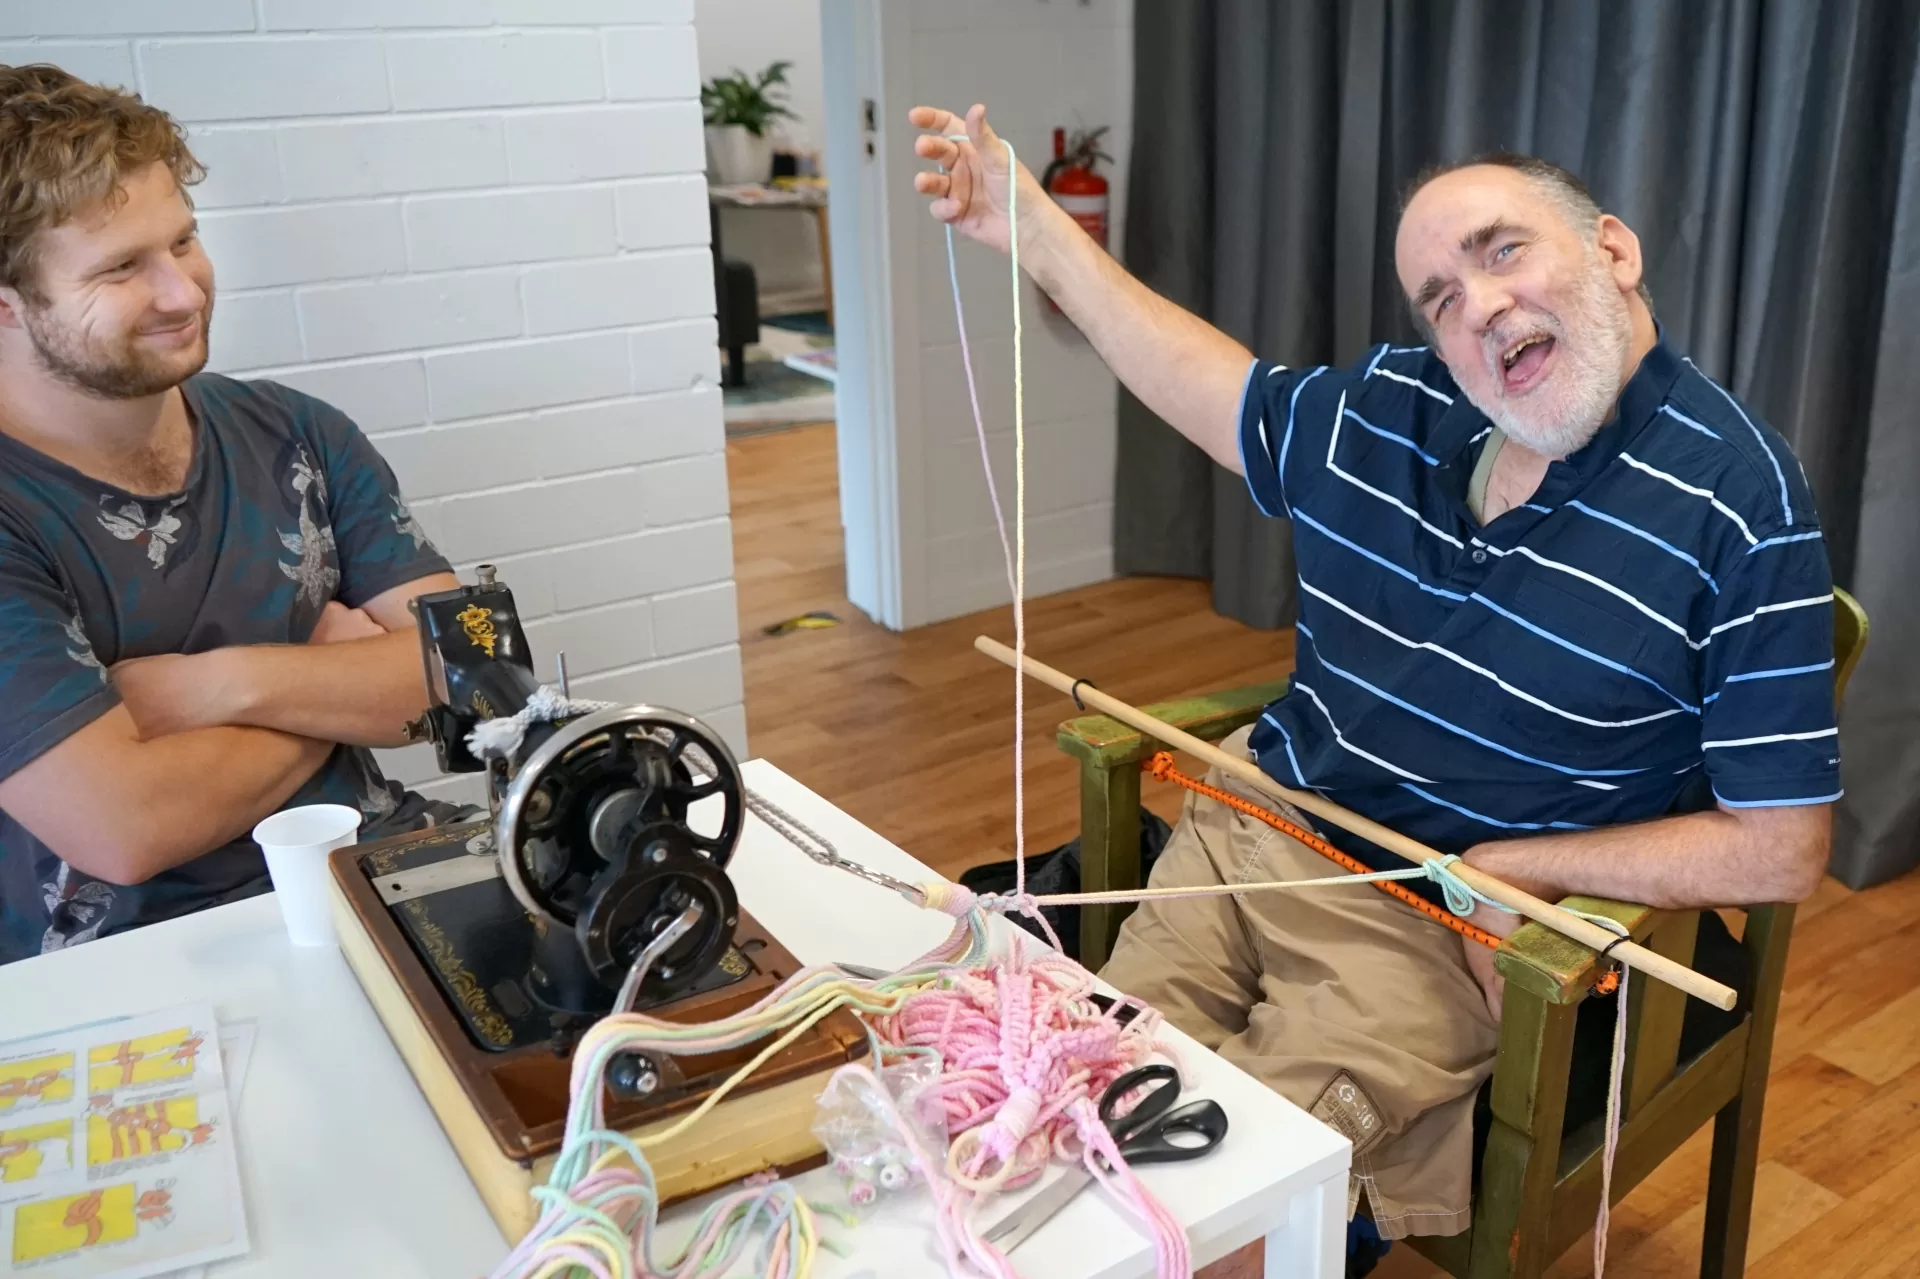 A man in a wheelchair smiles as he using macrame tools to craft